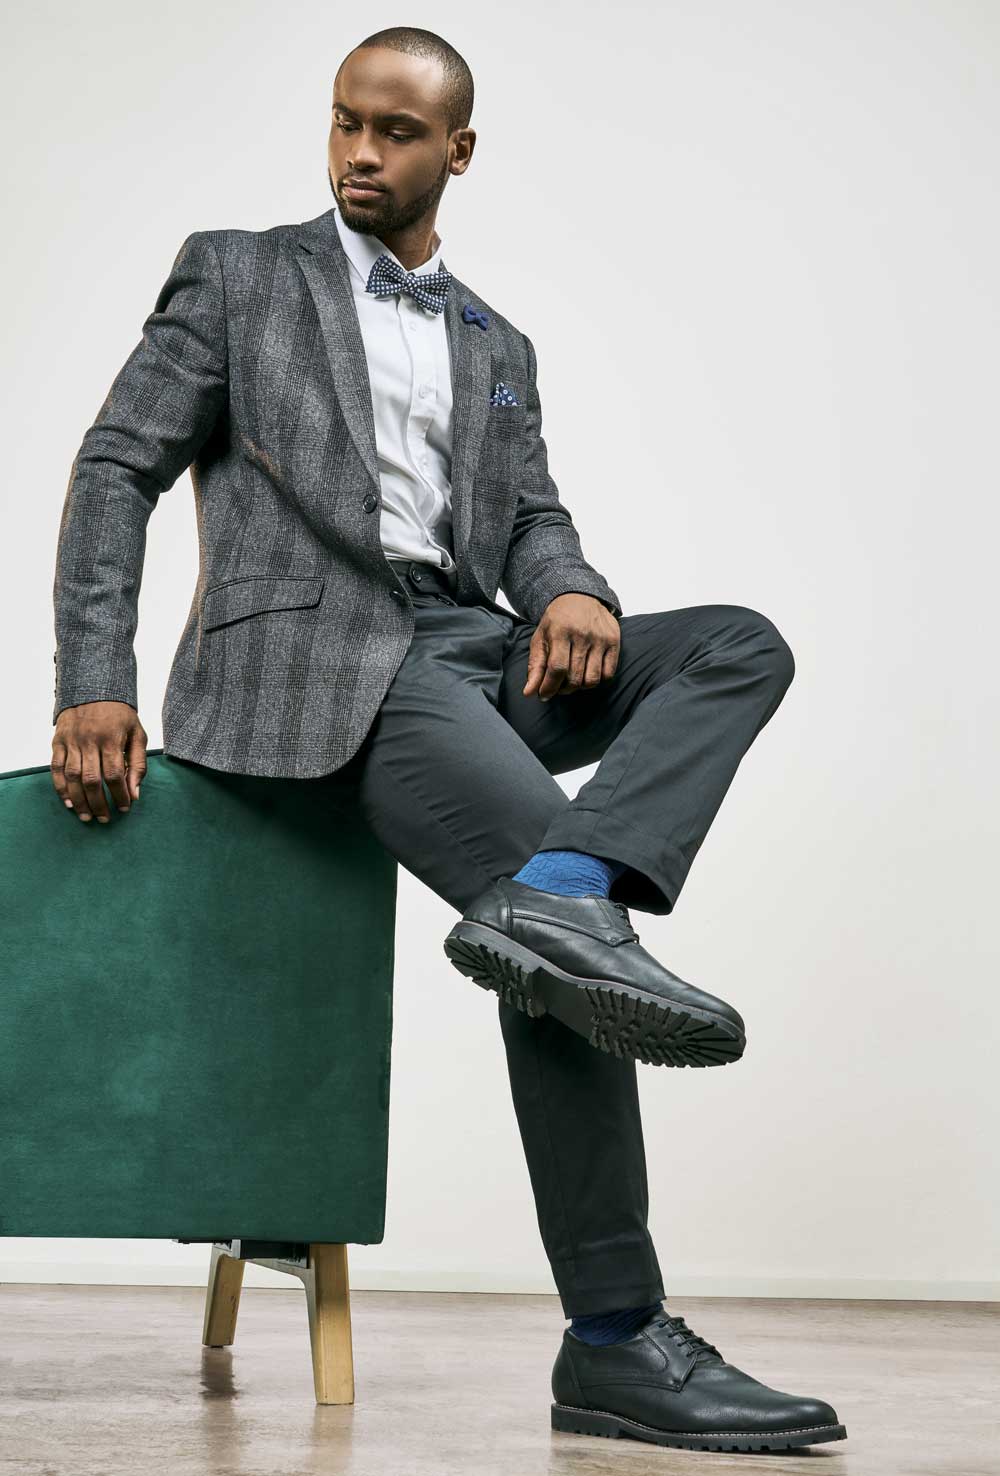 THE LOOK OF A MAN PART 2: WHAT’S YOUR WORKWEAR STYLE? | Edgars Mag